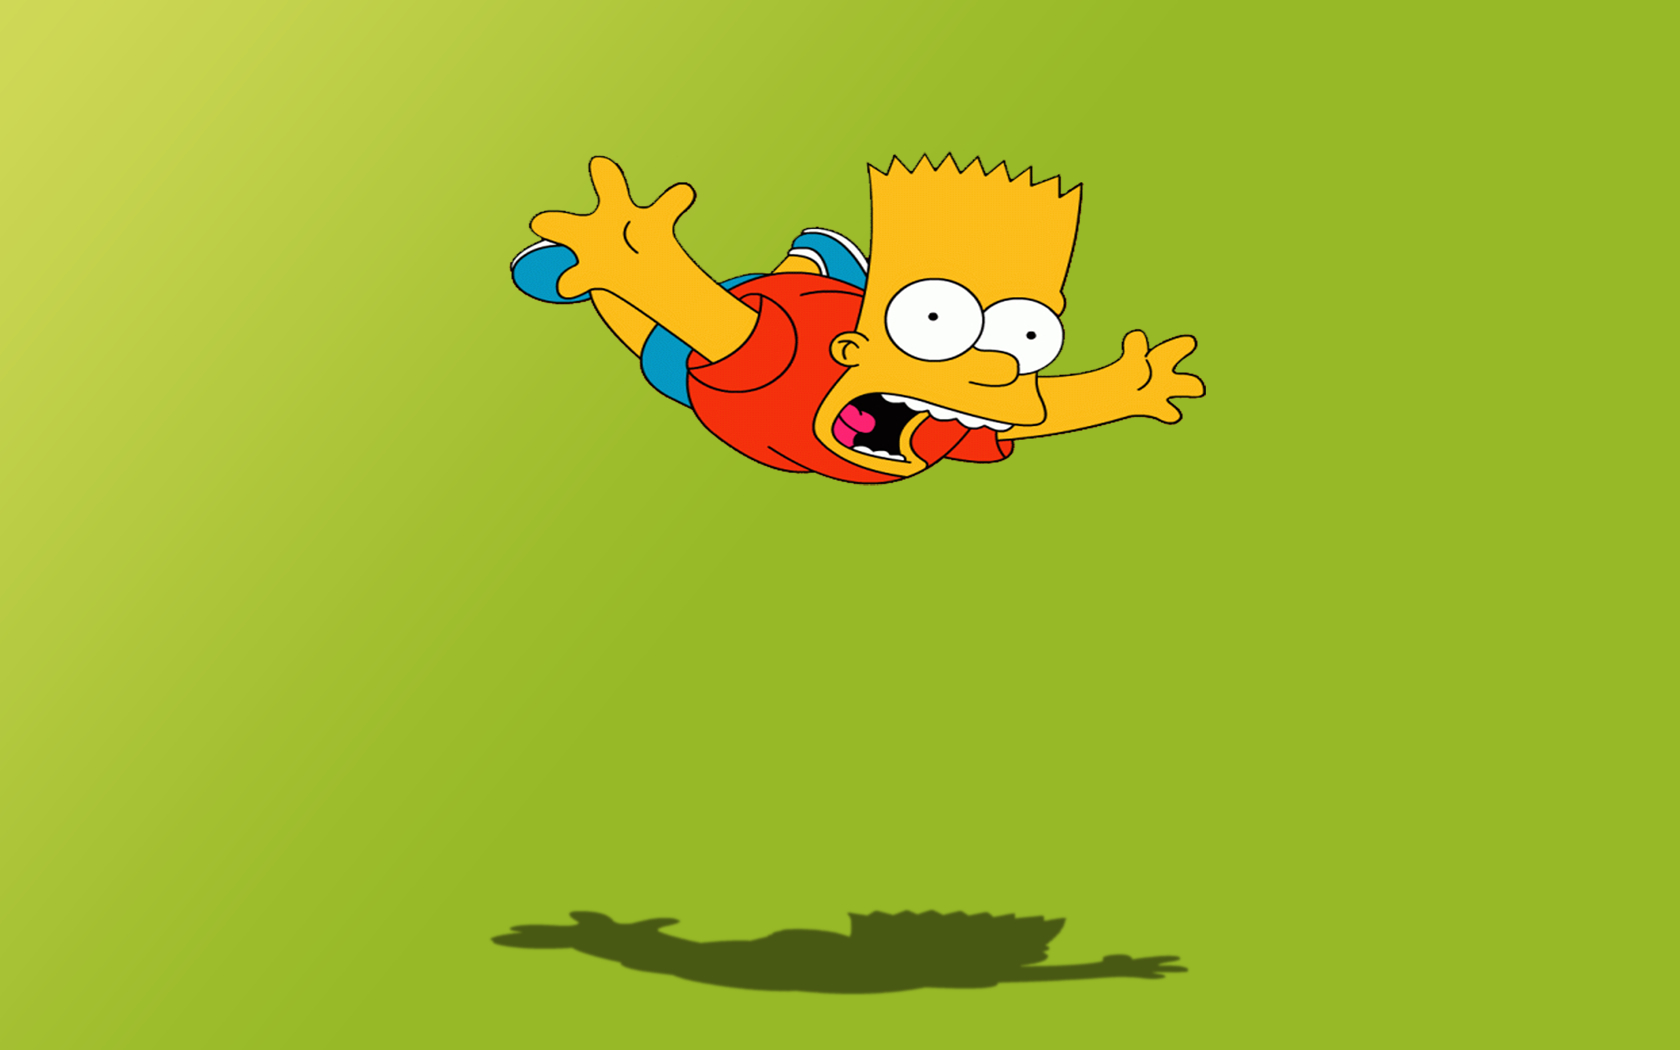 TV Show The Simpsons Wallpaper